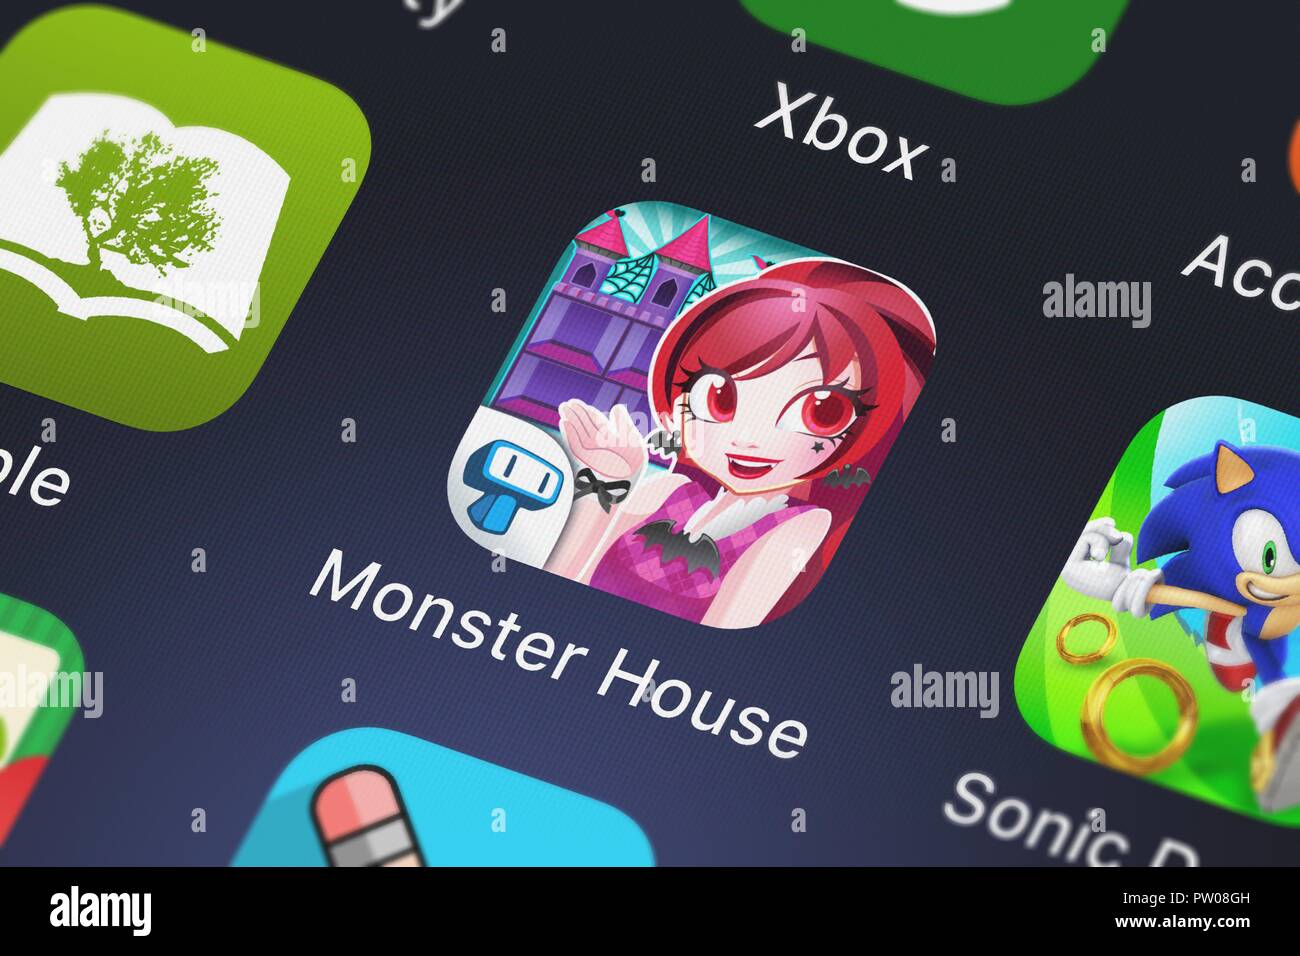 My Monster House: Doll Games - Apps on Google Play